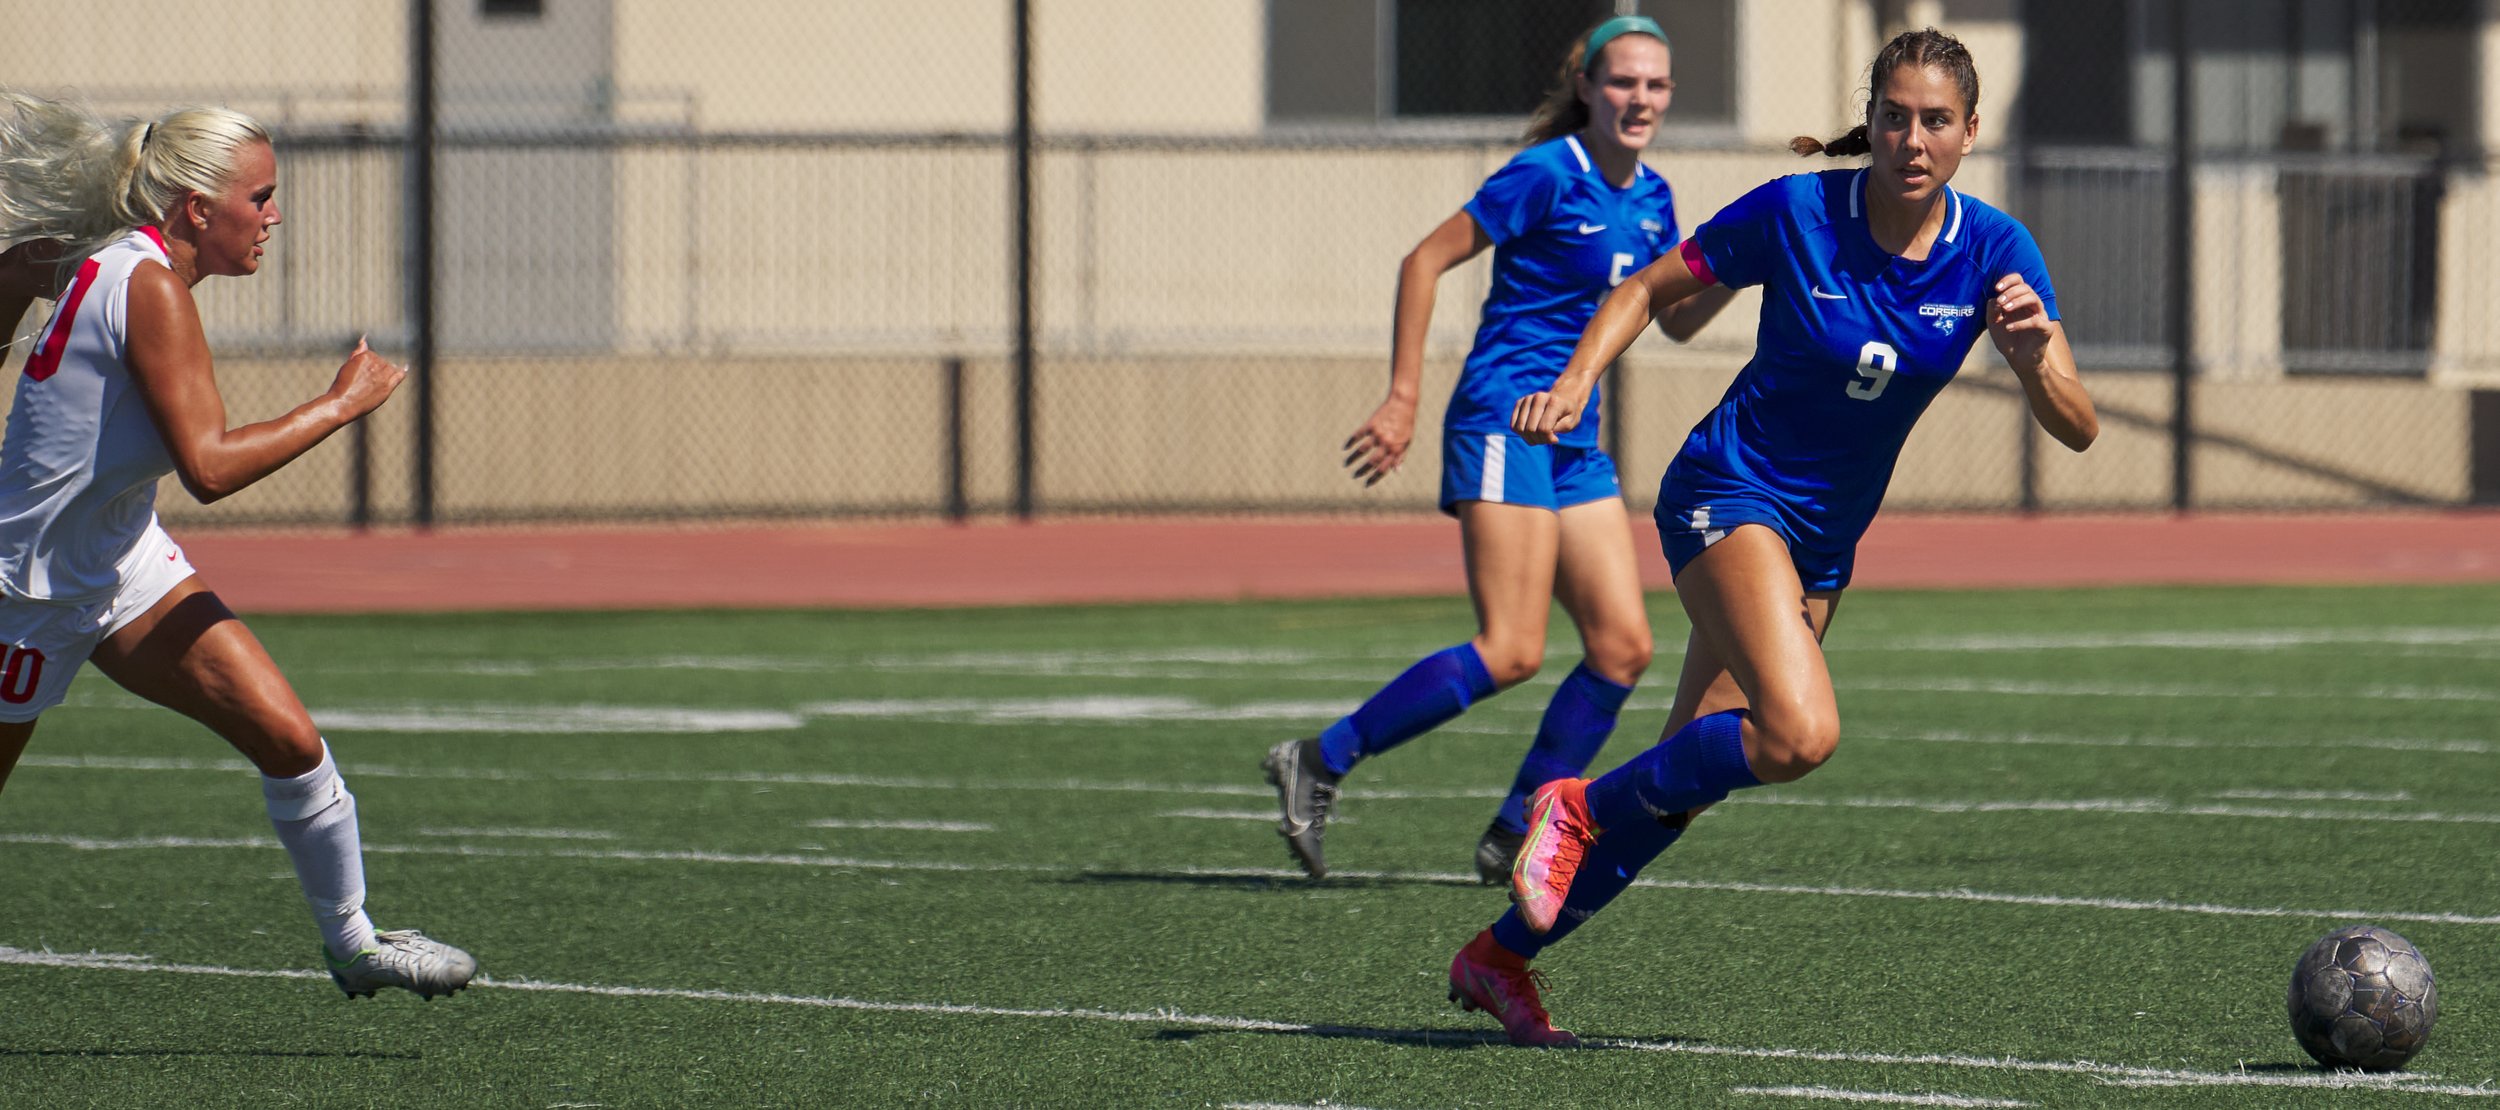  Santa Monica College Corsairs' Alexia Mallahi (right) keeps an eye on Helene Lervik (left), of the Santa Barbara City College Vaqueros, during the women's soccer game on Tuesday, Sept. 20, 2022, at Corsair Field in Santa Monica, Calif. The game ende